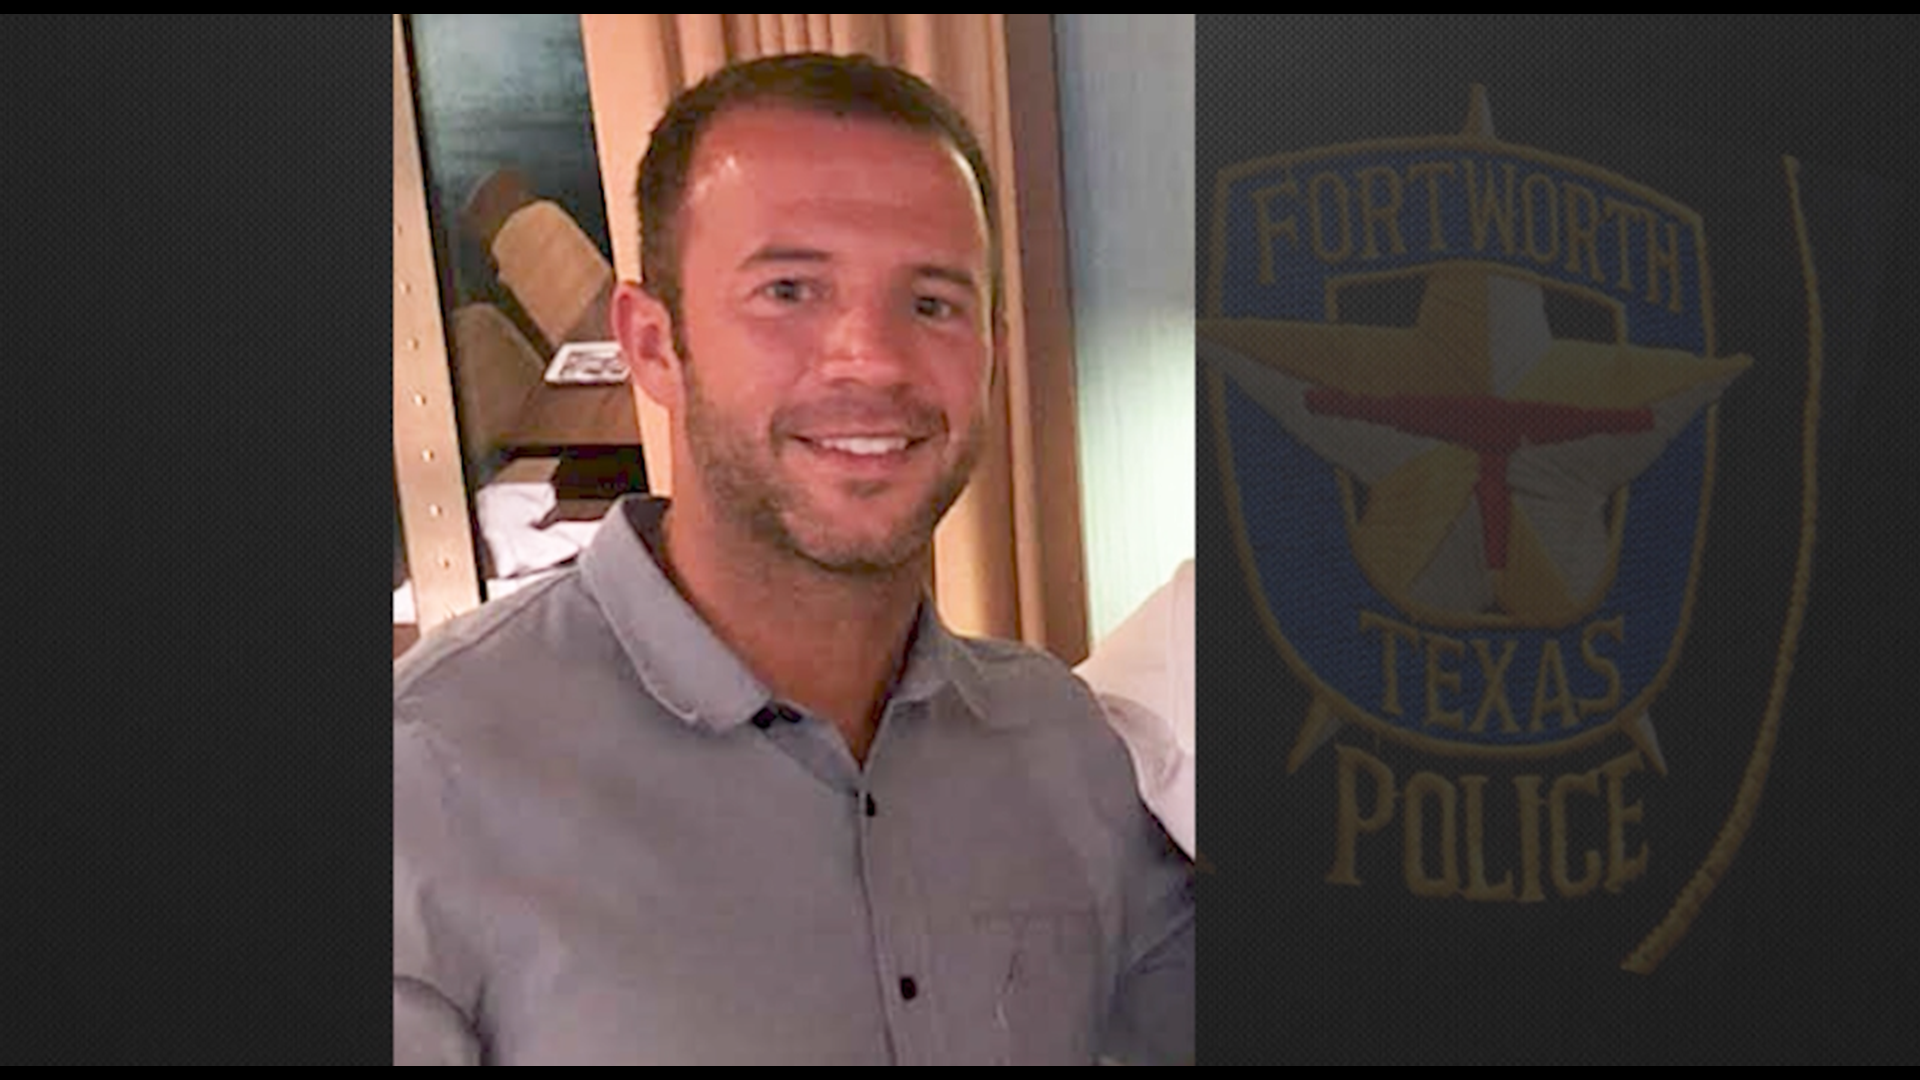 Matt Brazeal previously served in the U.S. Army and served with Parker County and the Weatherford Police Department.